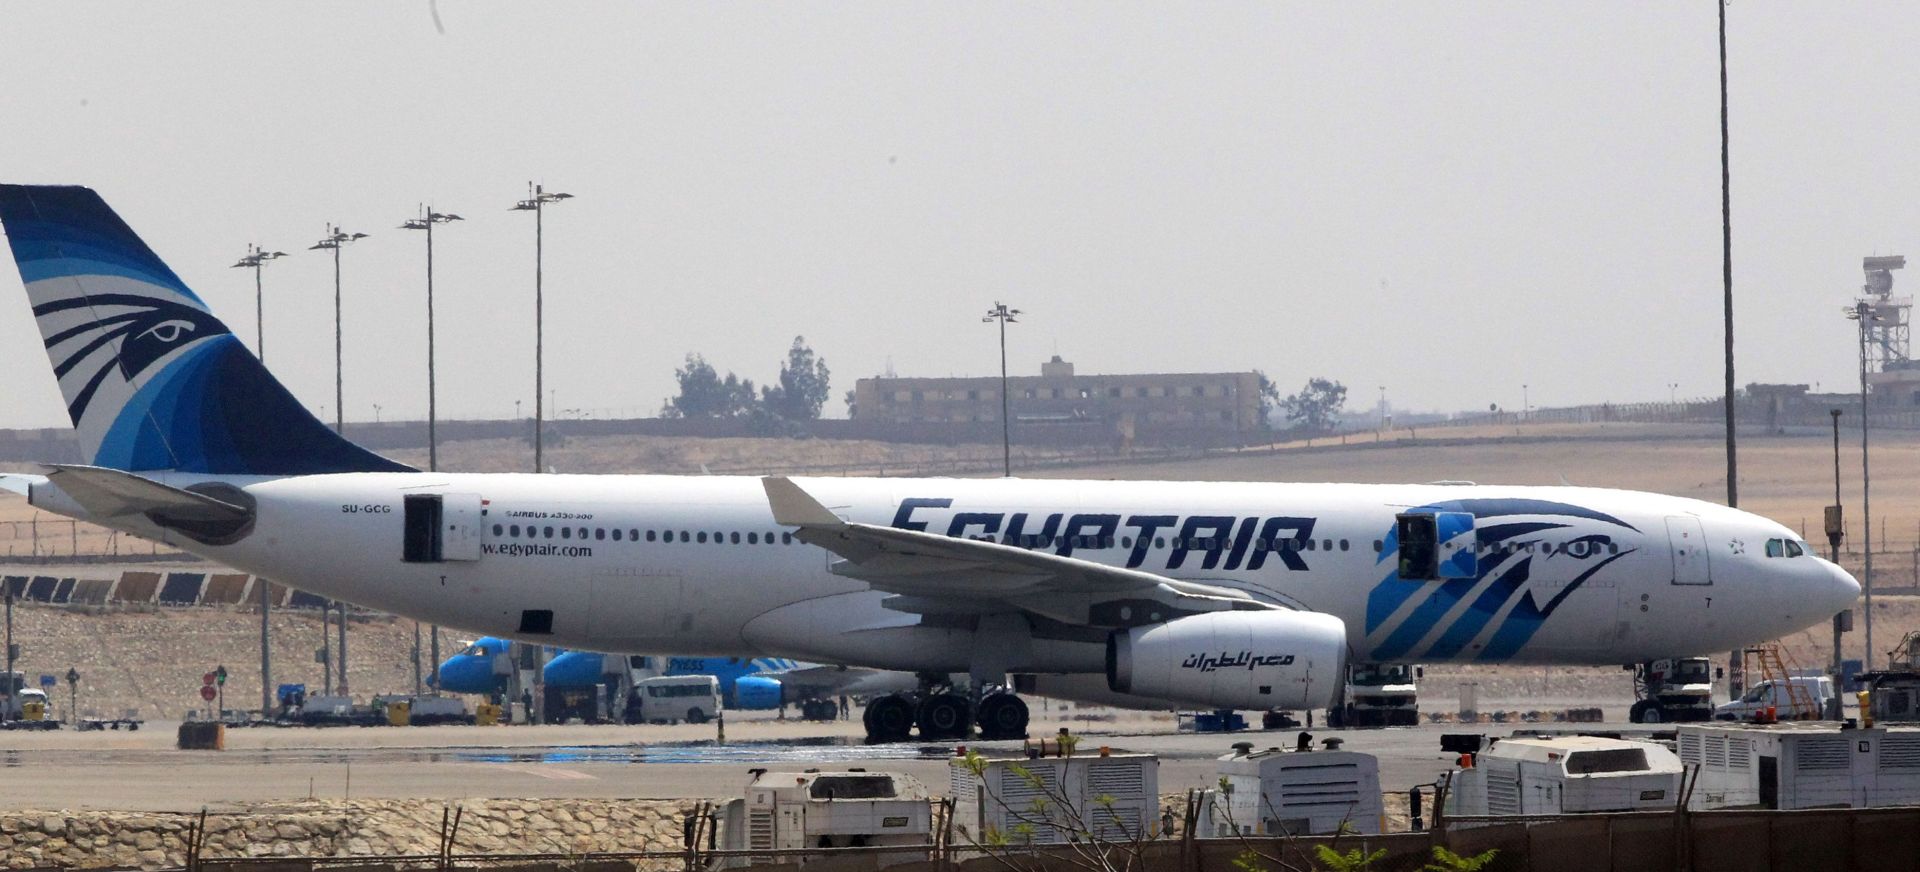 epa05315807 (FILE) A file picture dated 29 March 2016 shows aircrafts from Egypt's state-owned carrier, EgyptAir, sitting on a runway at Cairo Airport, Cairo, Egypt. According to media reports quoting Egyptair on 19 May 2016, EgyptAir Airbus A320 Flight MS804 disappeared off radar some 10 miles (16km) after entering Egypt's airspace. The plane, said to be carrying 69 people on board, 59 passengers and 10 crew members, took off from France's Charles de Gaulle airport on 18 May night and was expected to land in Cairo on 19 May early morning. According to the airline's twitter account, they contacted the concerned authorities and bodies for inspections through rescue teams.  EPA/KHALED ELFIQI